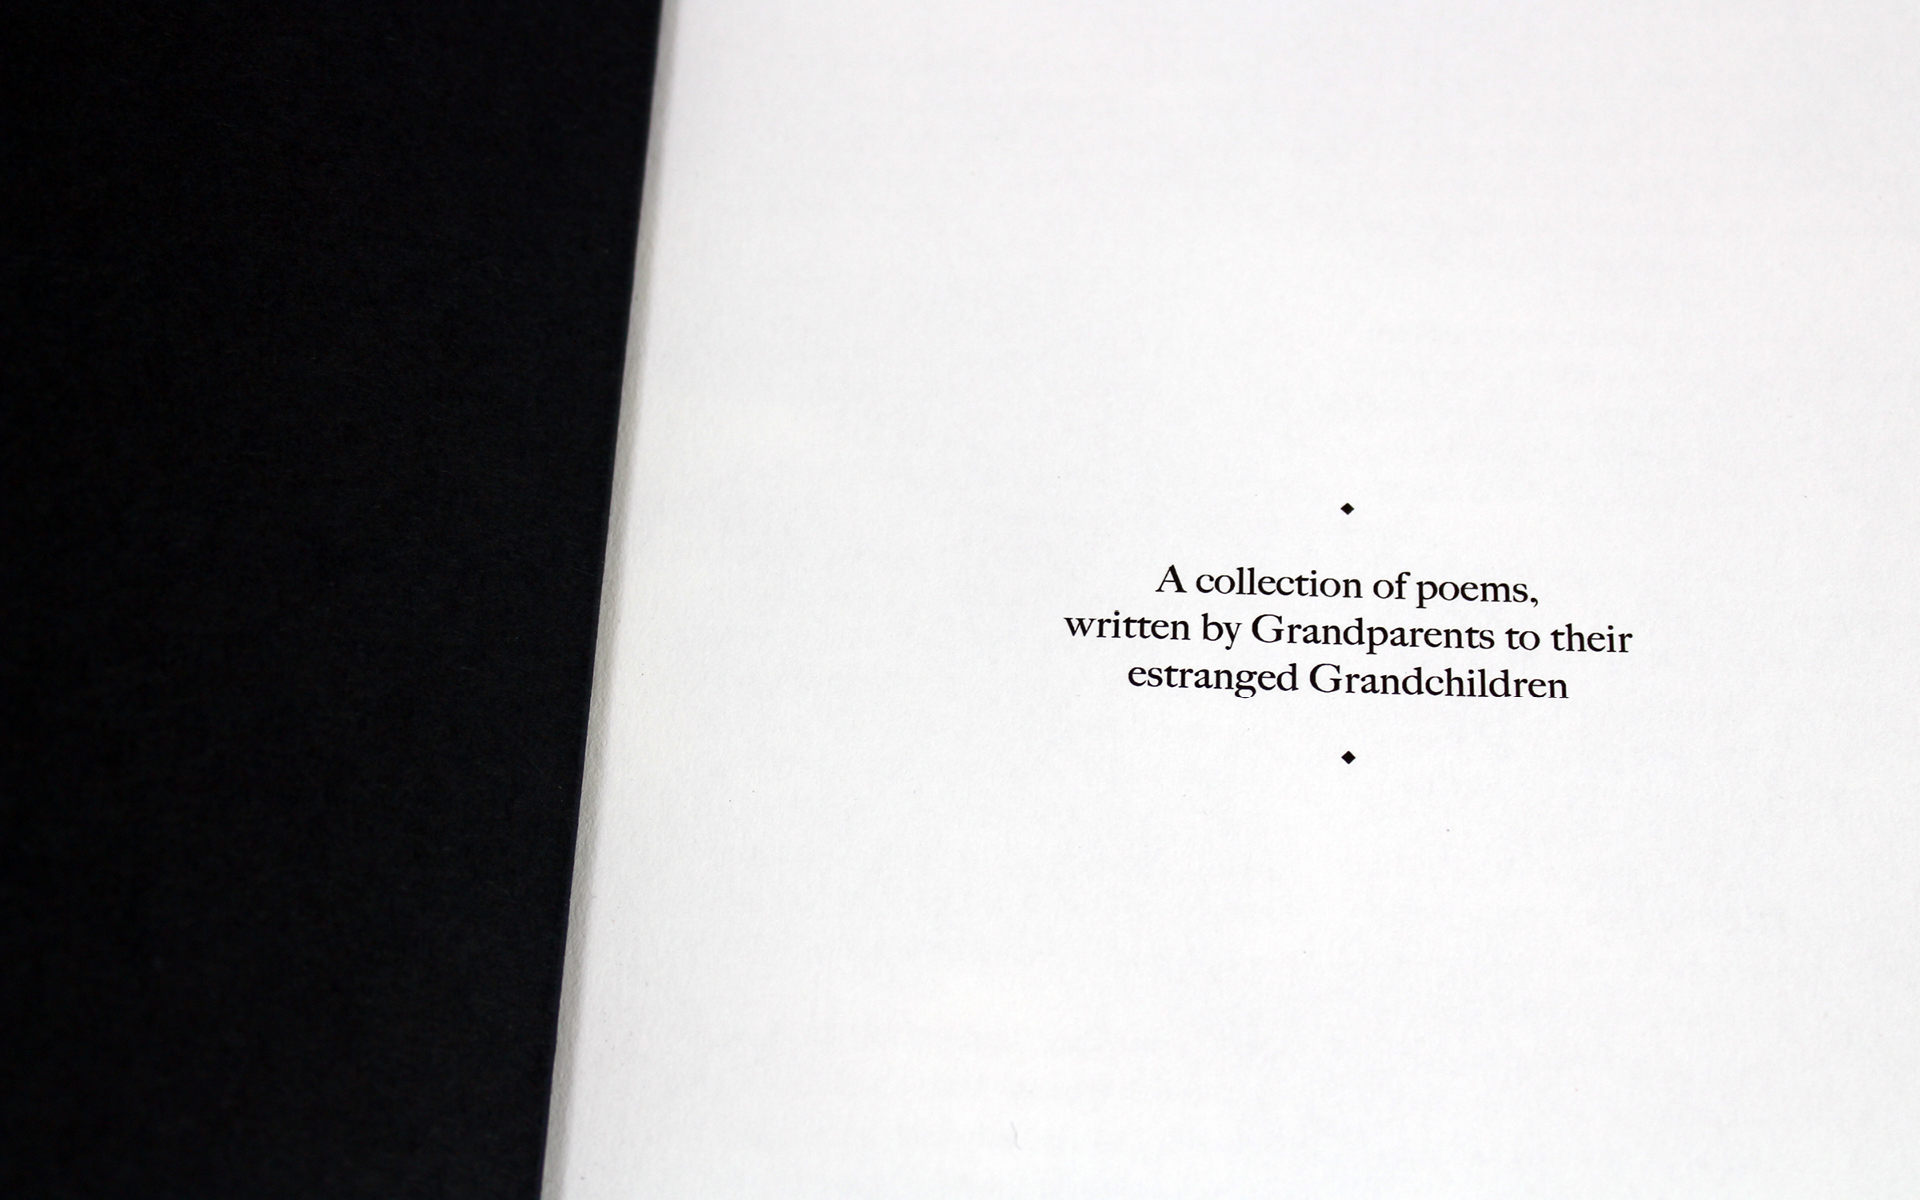 Dedication page for Never Forgotten book of poems